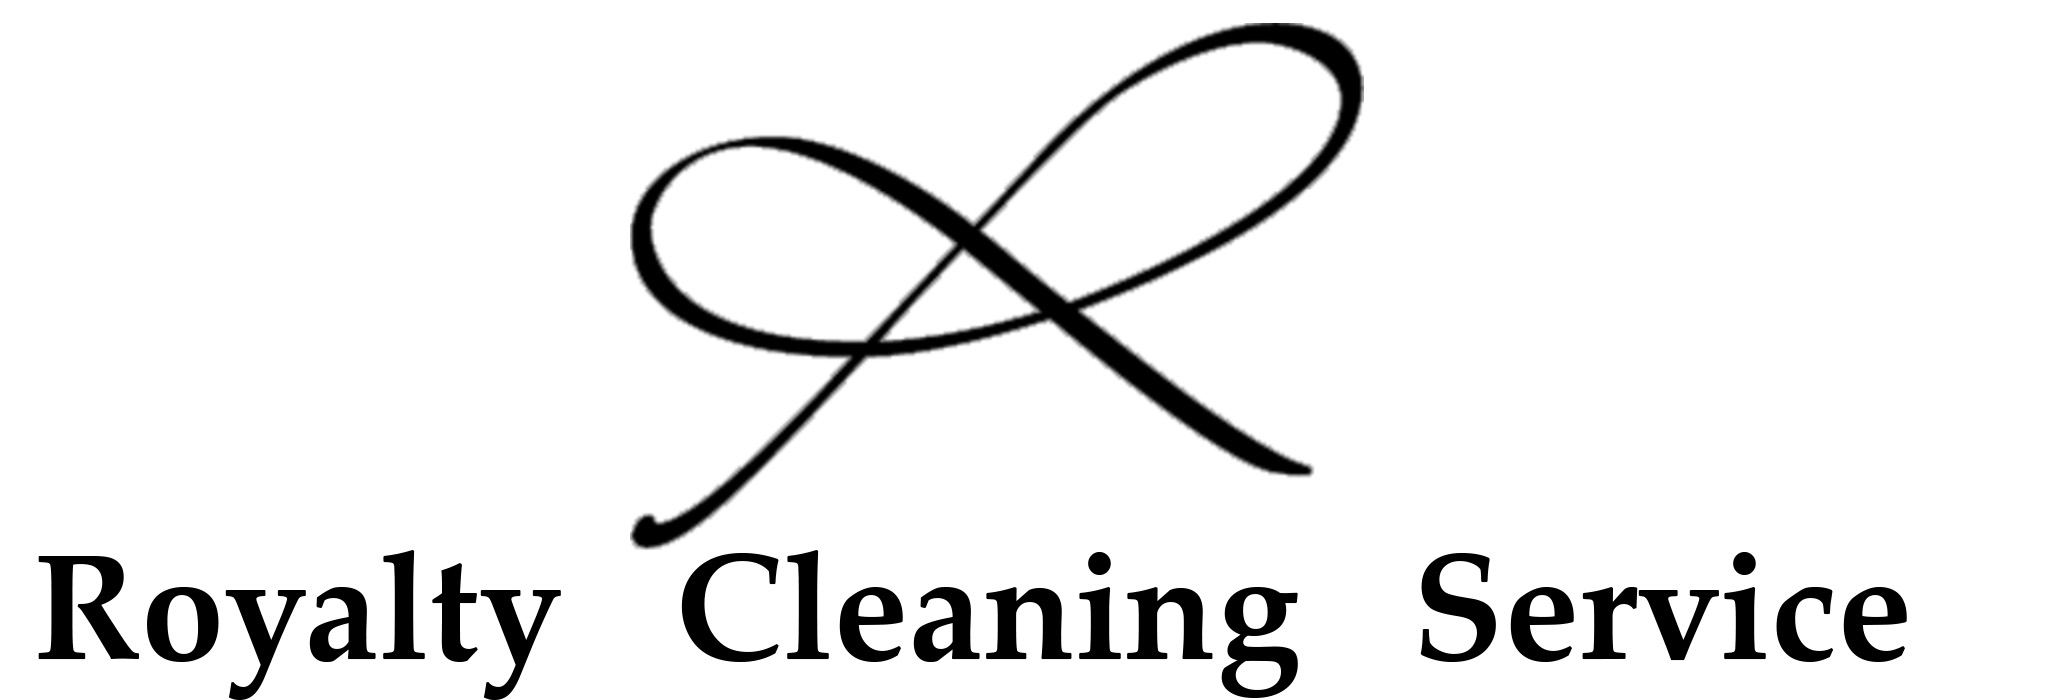 Commercial Cleaning, NY | Residential Cleaning, New York | Royalty Cleaning Service Logo - Image